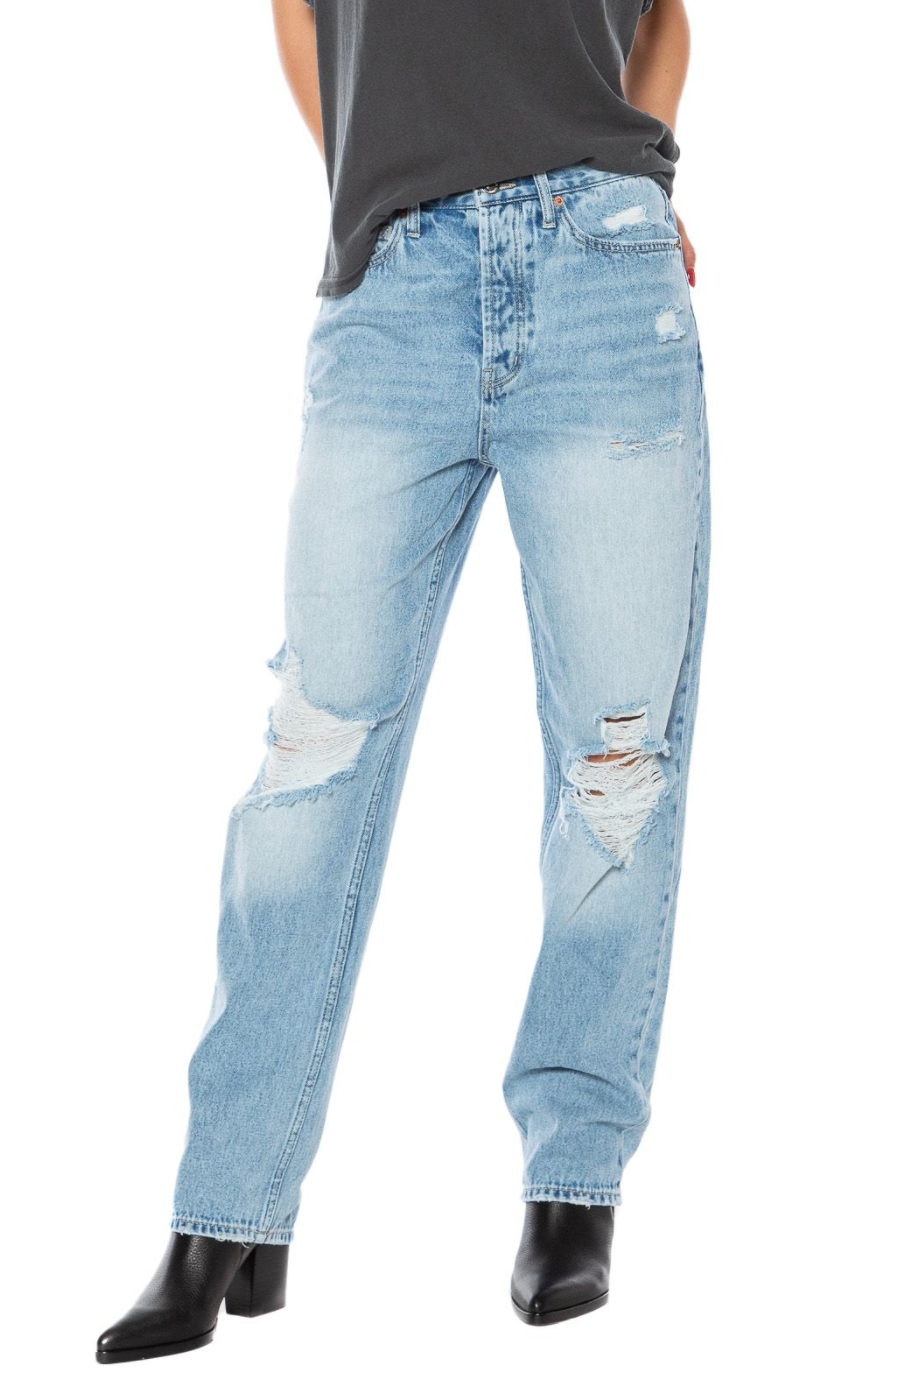 Juicy Couture Relaxed Jean